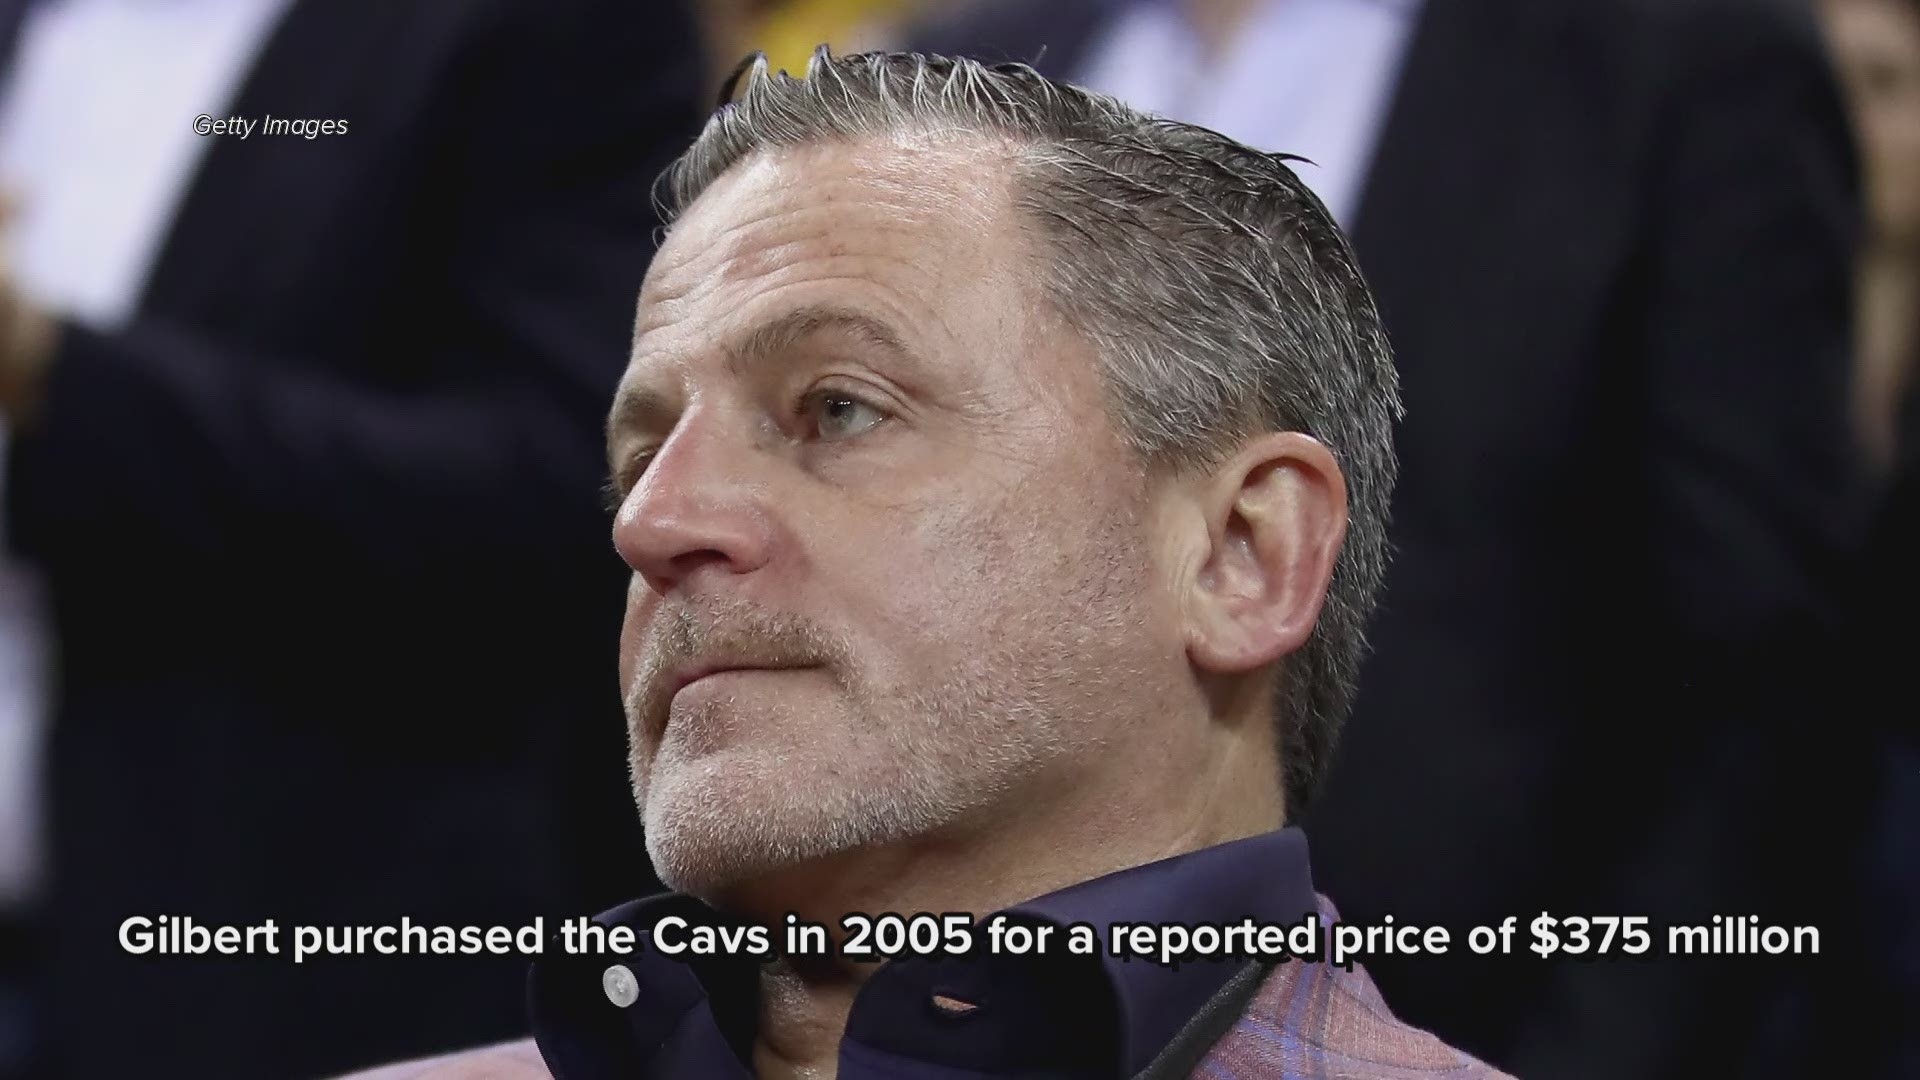 James, Cavs owner could mend differences, reunite